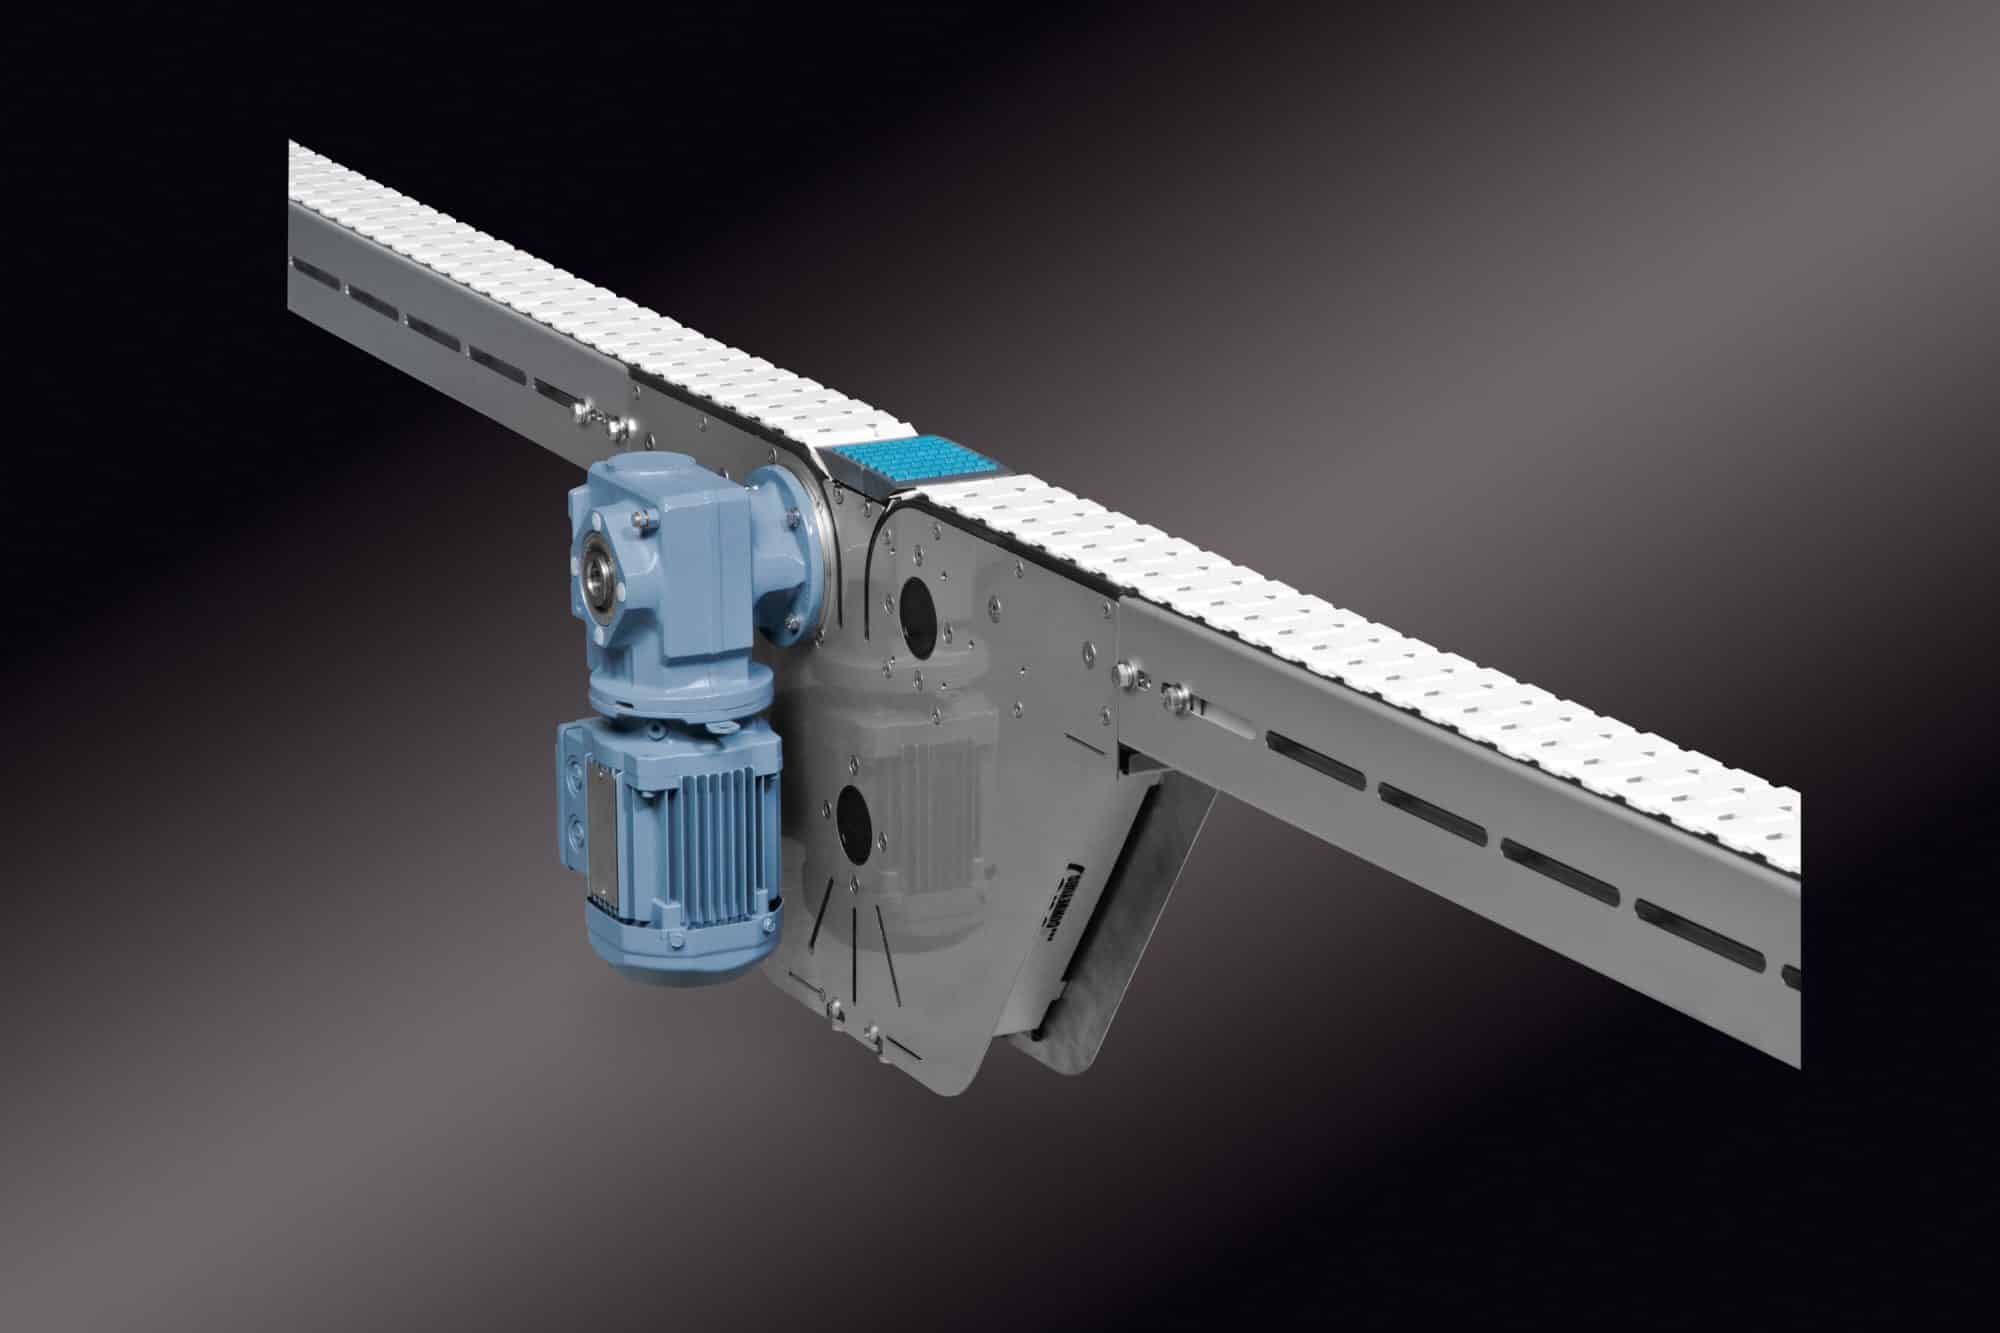 You can easily connect moren ETS conveyors, to bridge large distances in your warehouse or production environment.